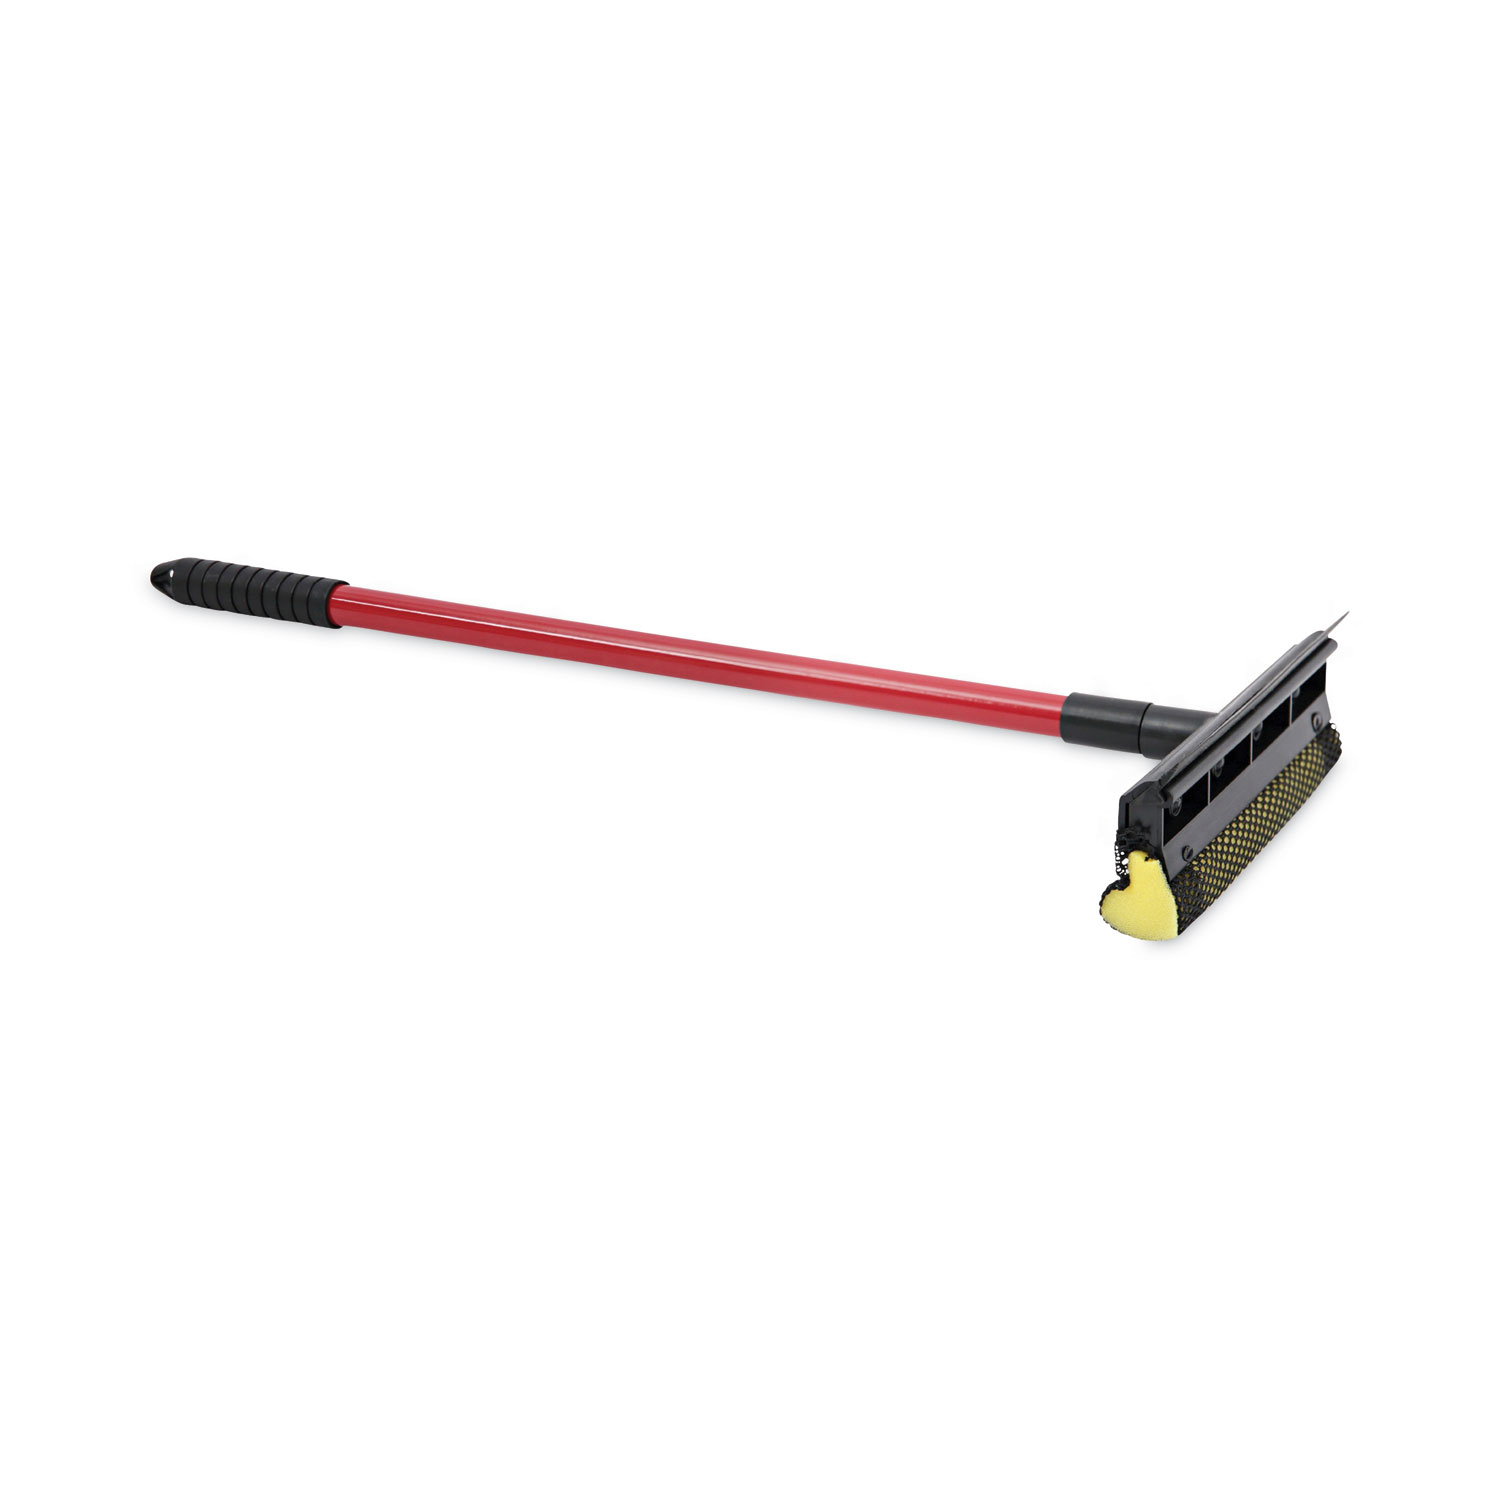 Vikan Double Blade Squeegee, 20 - TCW Equipment